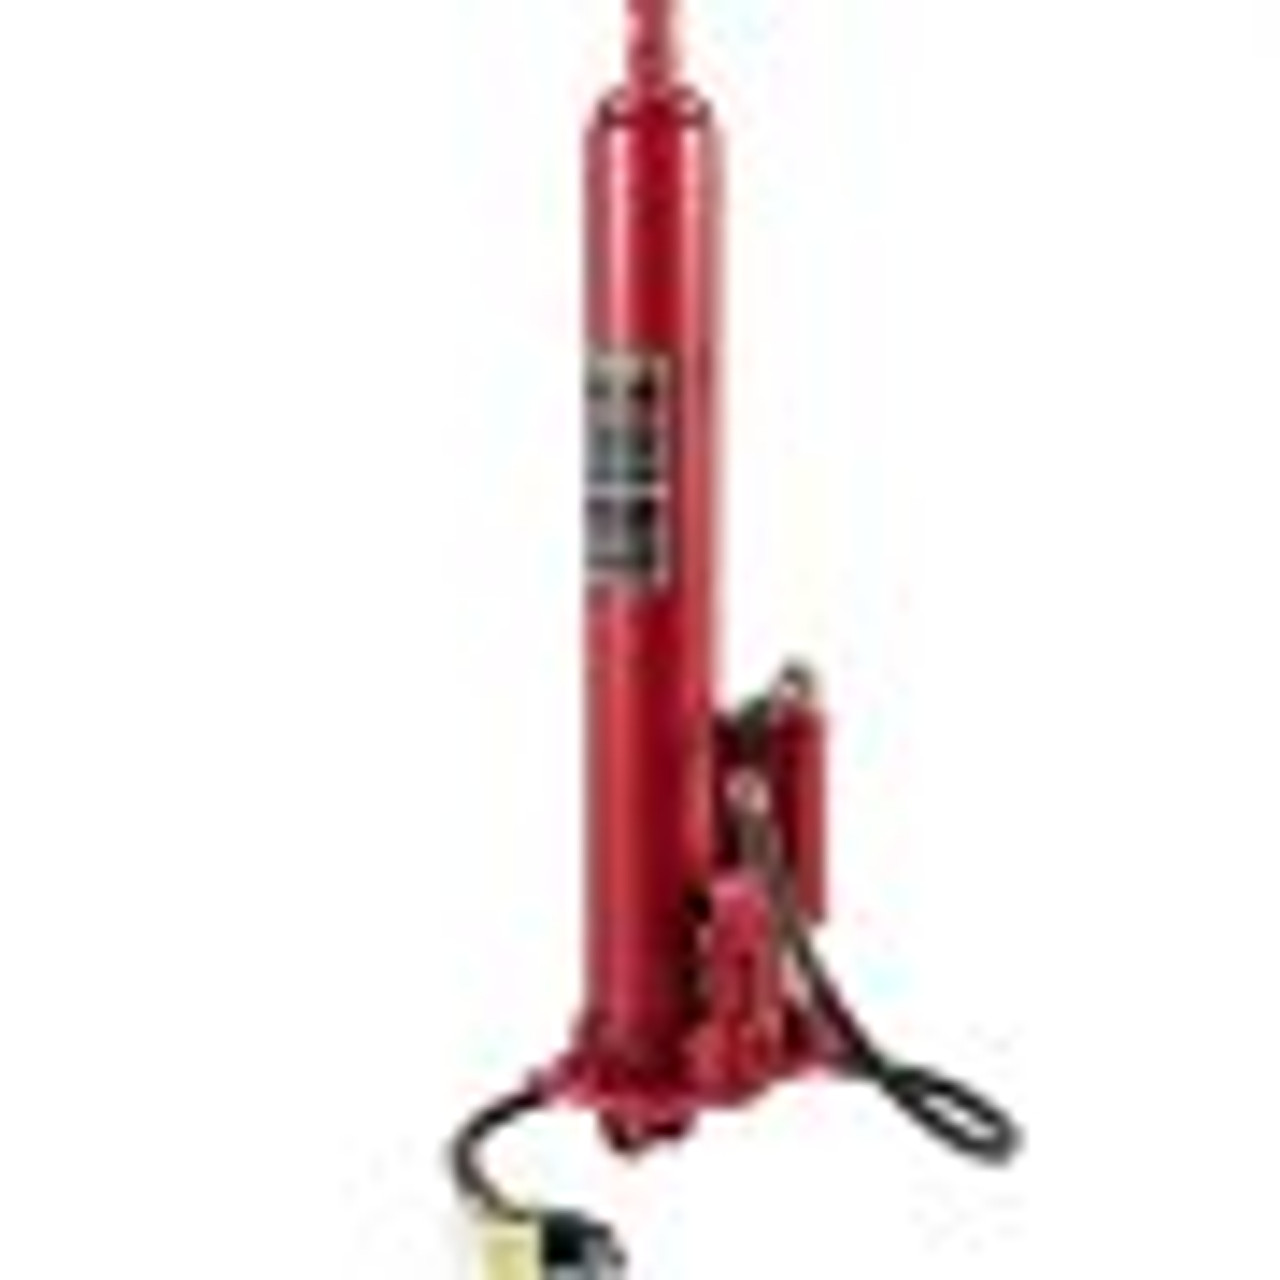 Hydraulic/Pneumatic Long Ram Jack, 8 Tons/17363 lbs Capacity, with Single Piston Pump and Clevis Base, Manual Cherry Picker w/Handle, for Garage/Shop Cranes, Engine Lift Hoist, Red